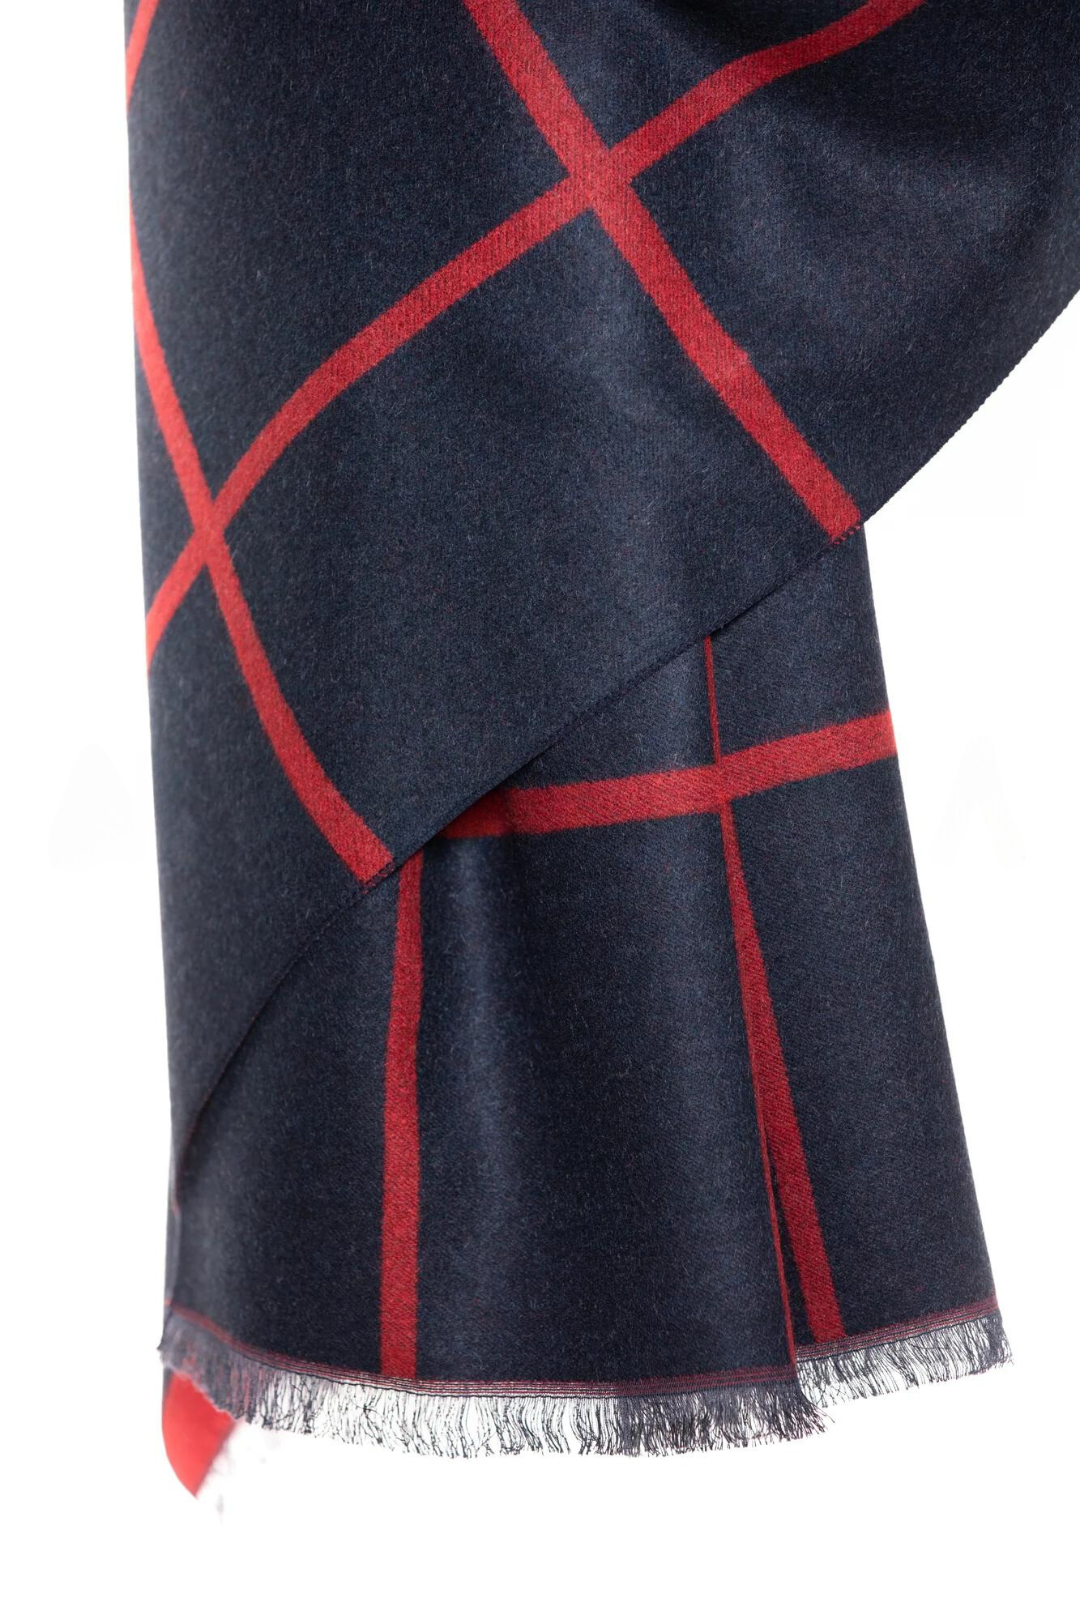 Reversible Mo-shmere Modal Cashmere Checkers Shawl - Dark Navy Red